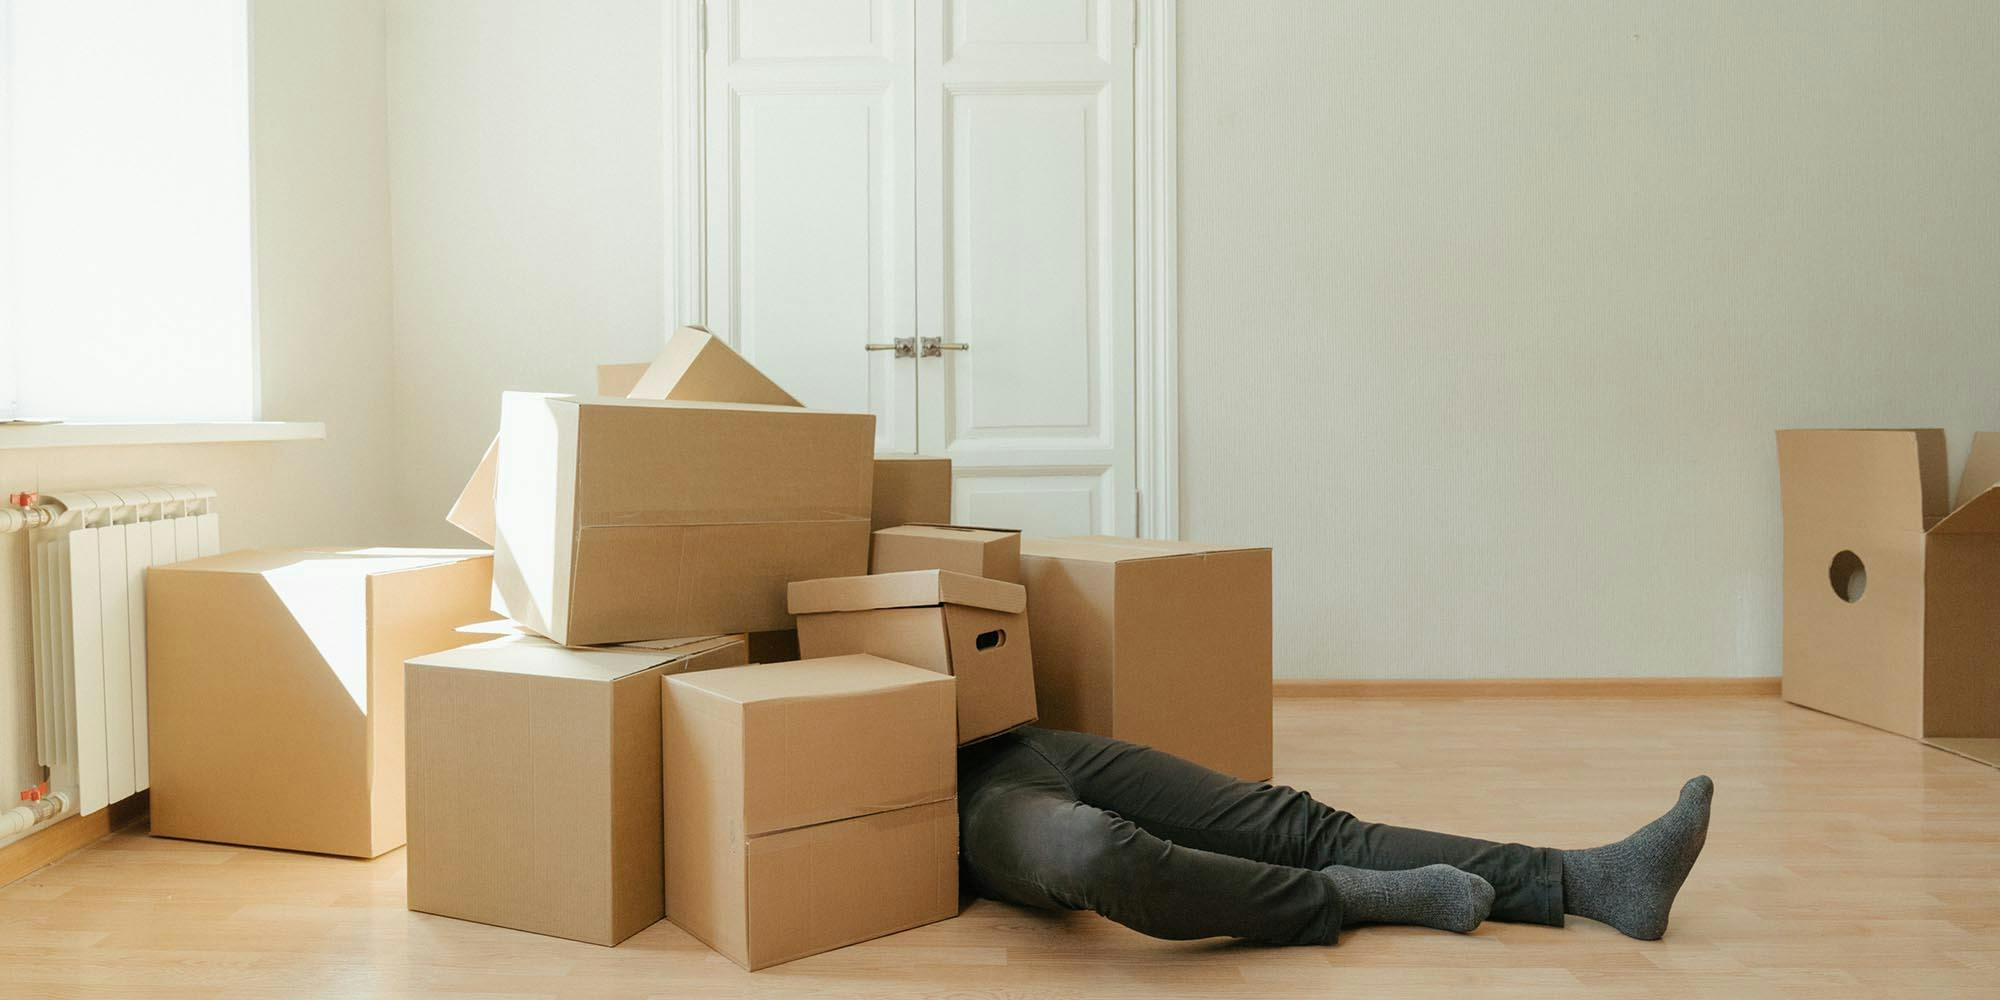 Cover Image for The Right Moving Supplies For Faster, Easier, Less Stressful Moves